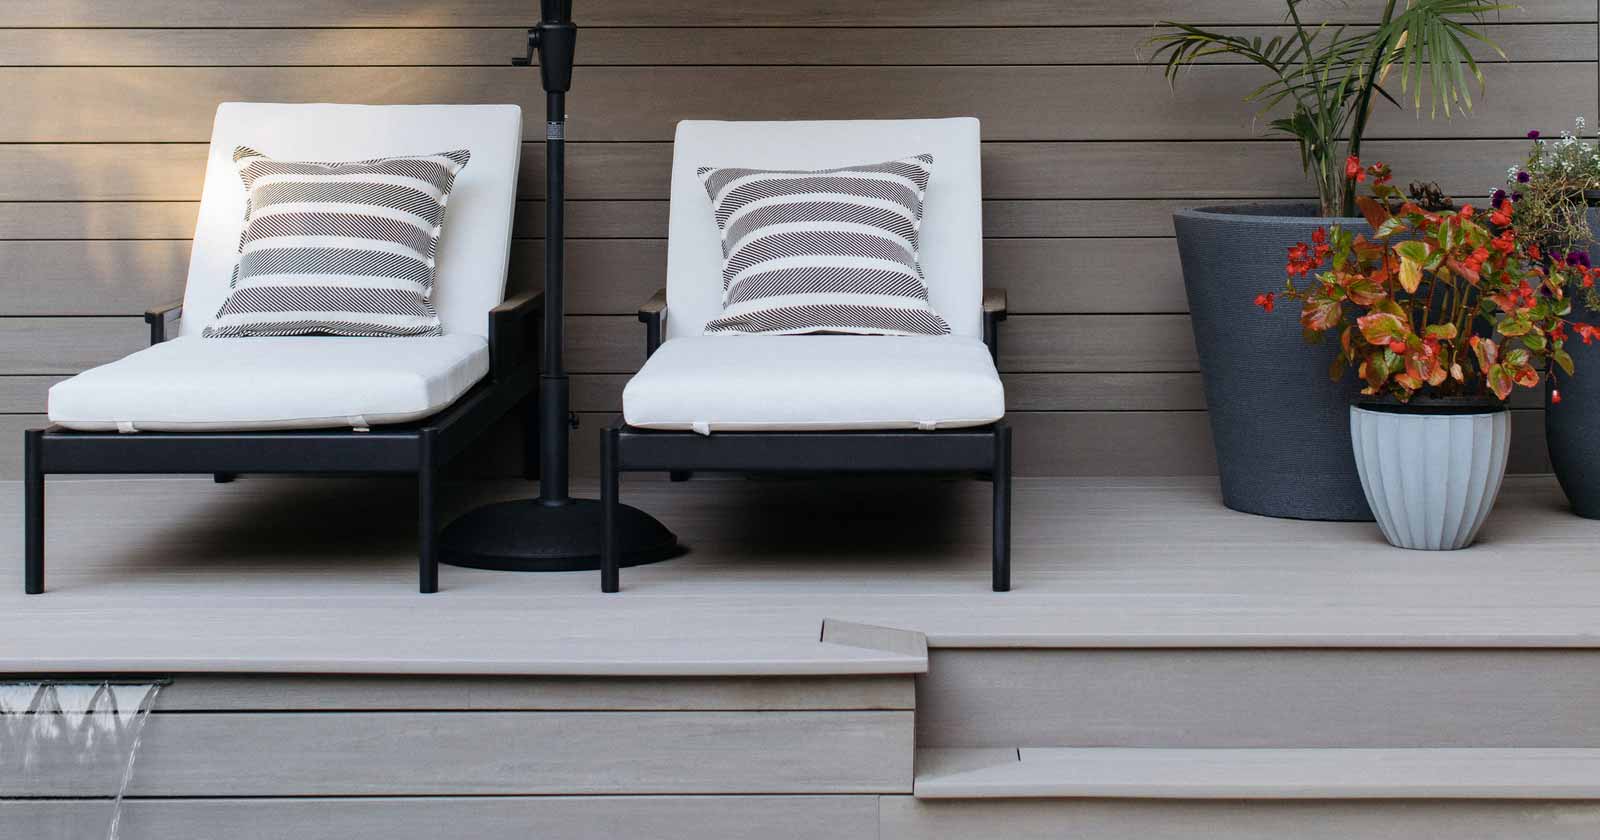 Gray pool deck with matching backboards and lounge chairs